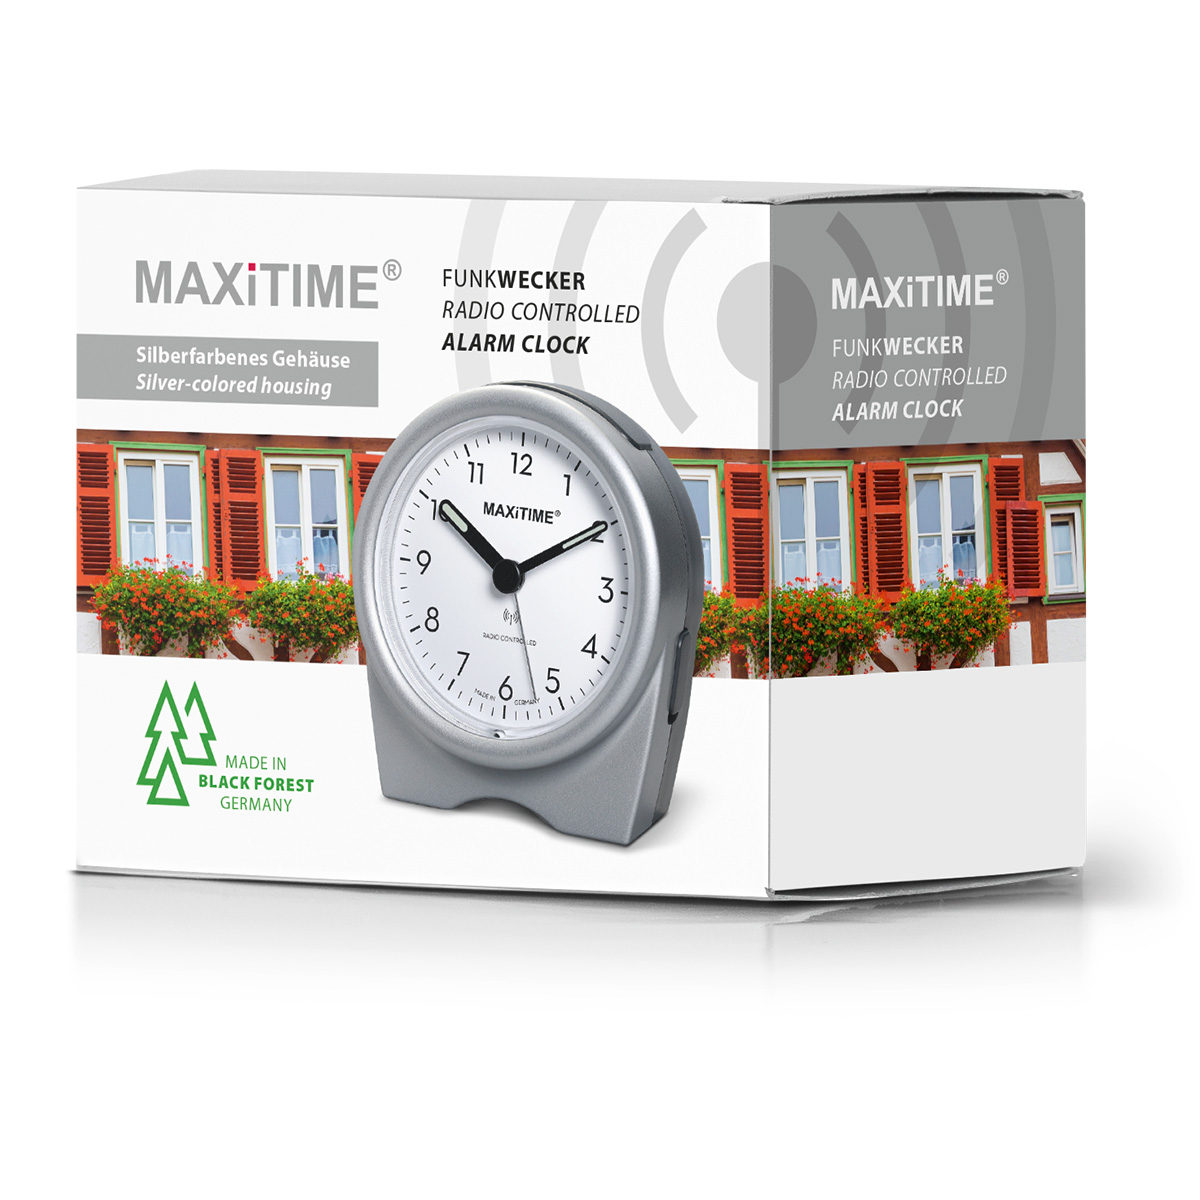 Maxitime radio controlled alarm clock with snooze, crescendo alarm, light, 2 hands, silver colored housing with stand